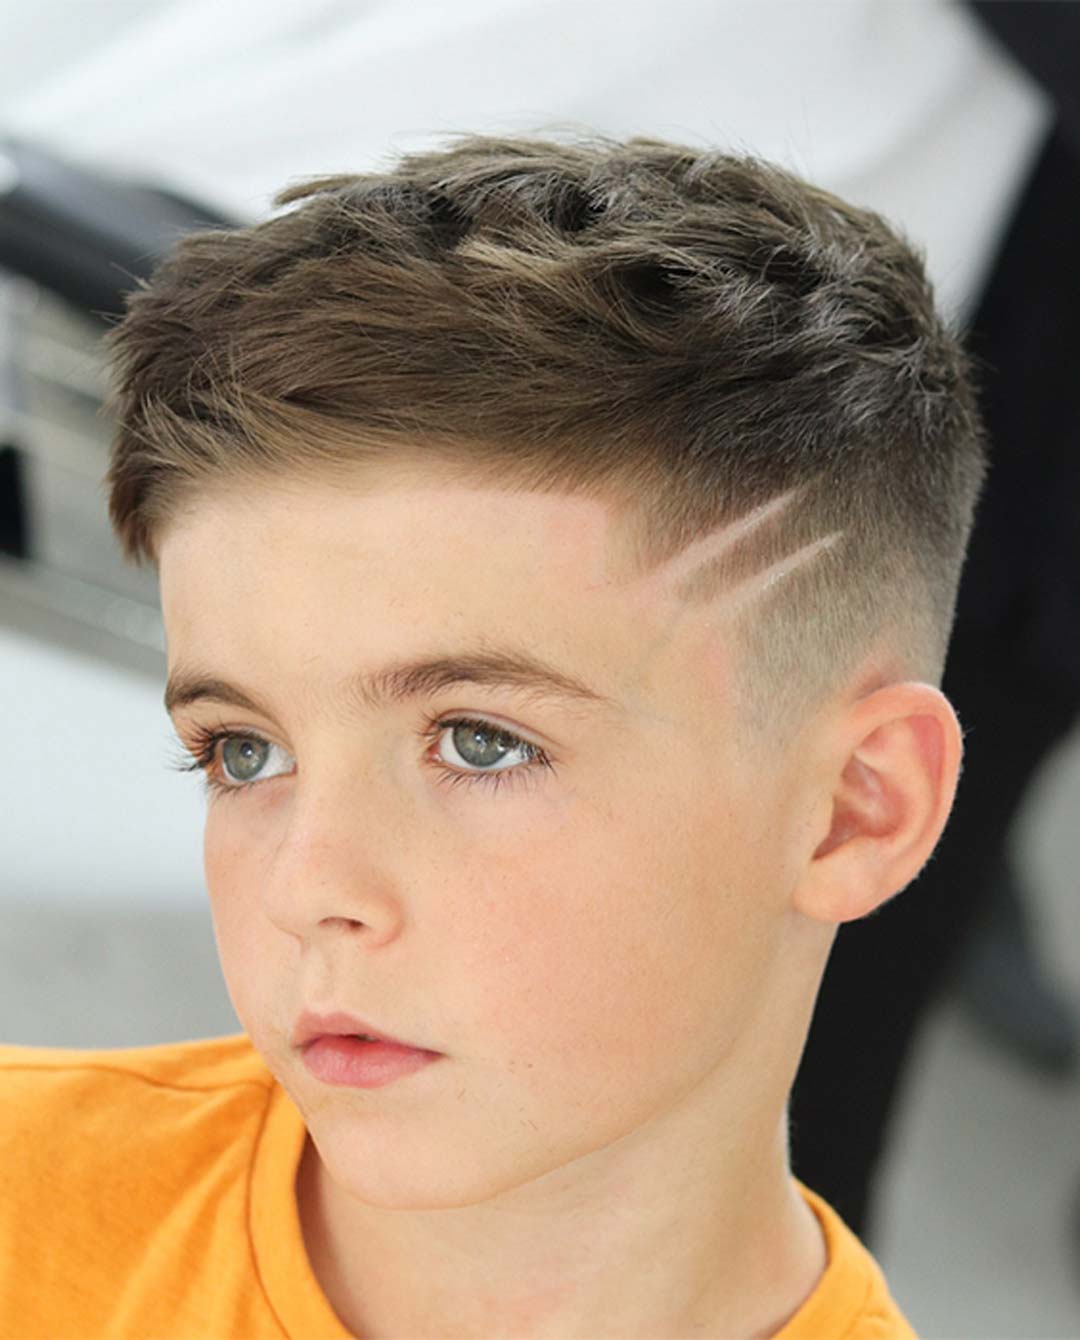 36+ Nice School Haircuts for Boys - The Ultimate Styles 2023